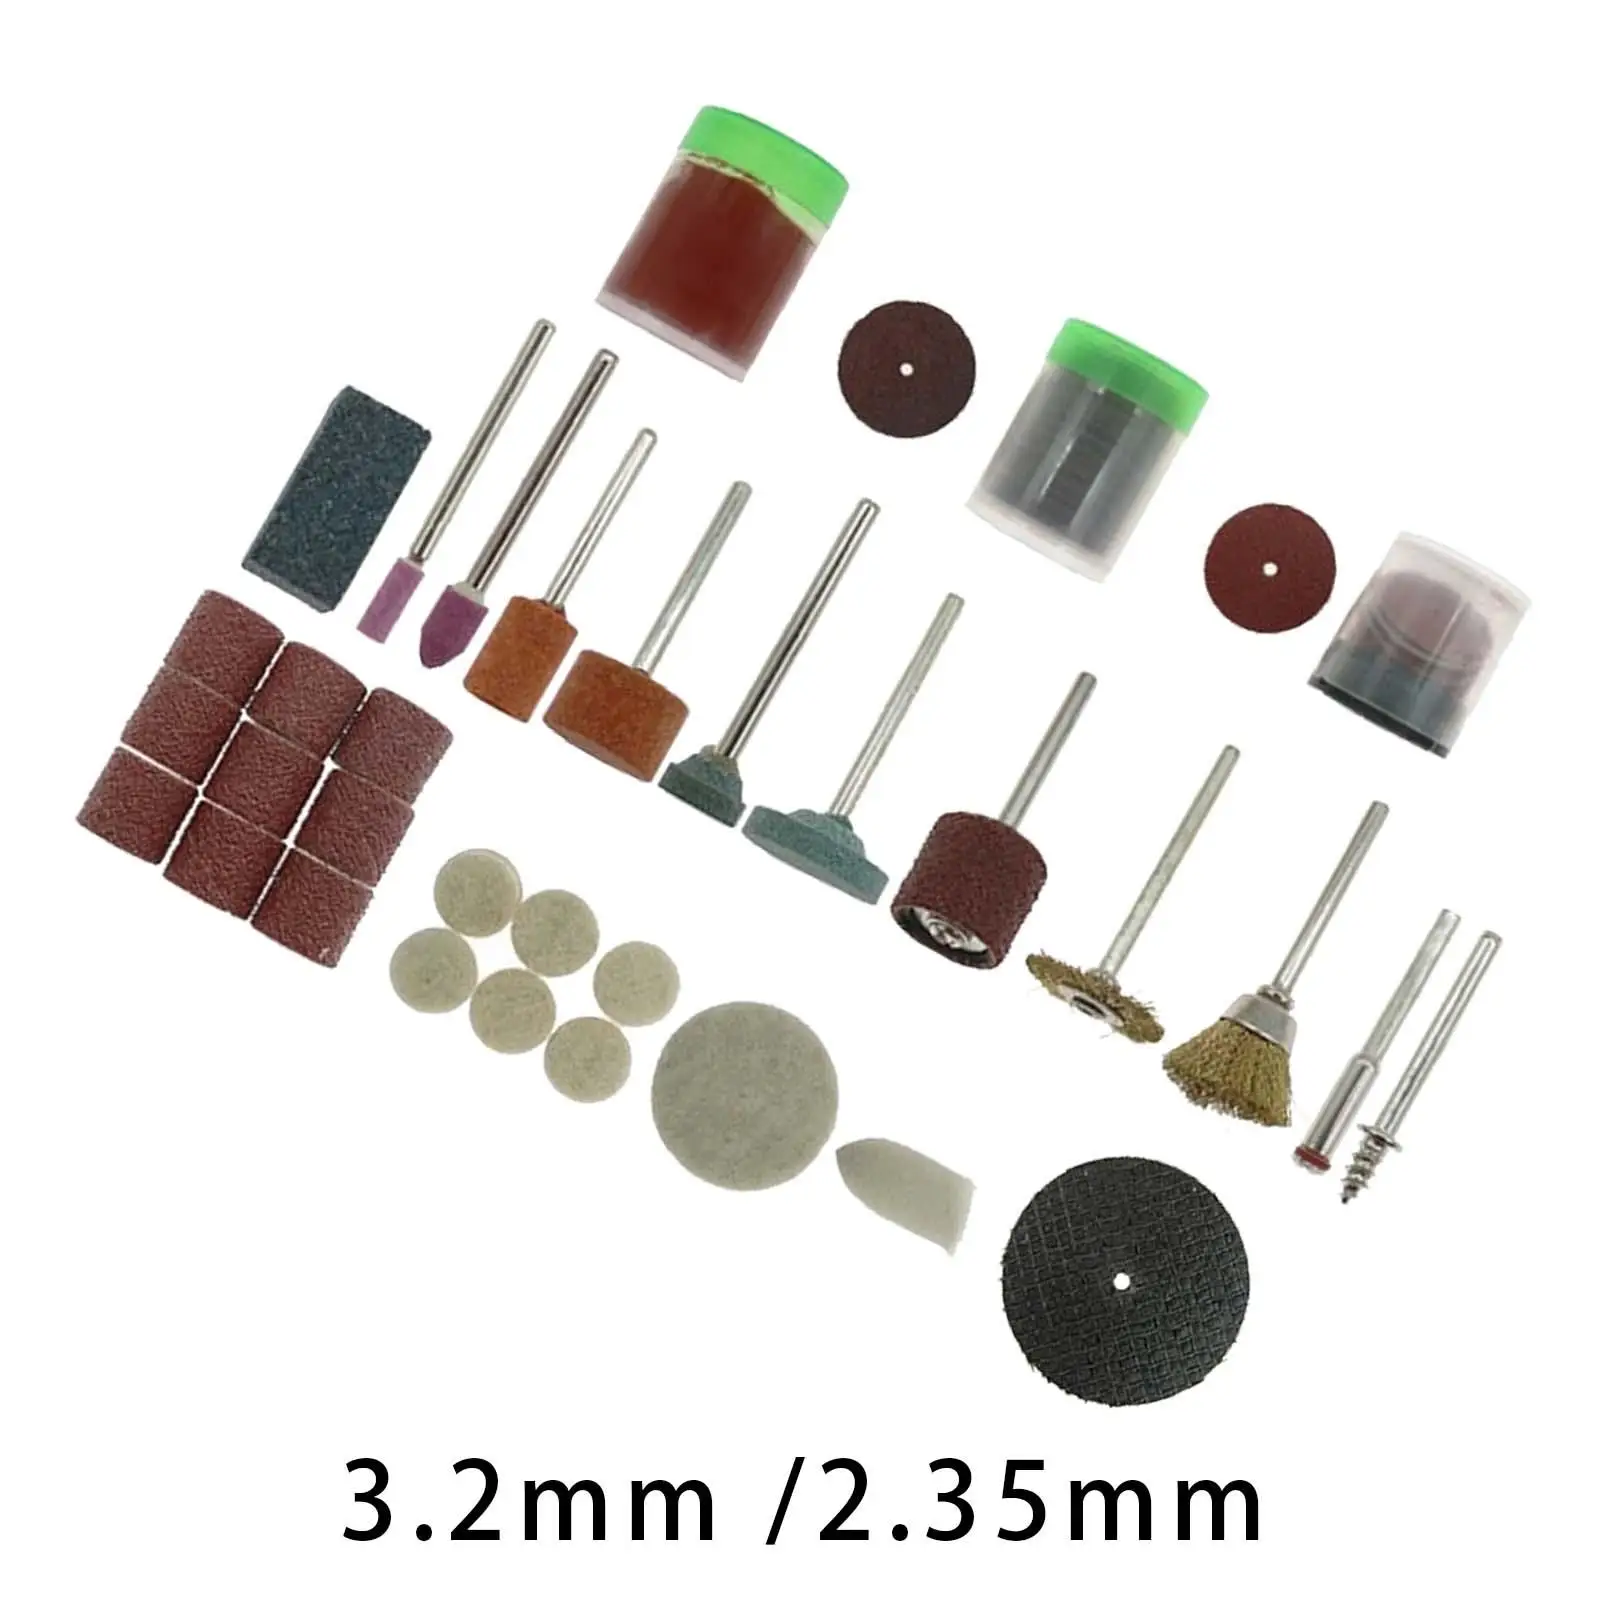 105x Grinder Set Multipurpose Professional Mini Rotary Tool Set for Engraving Craft Projects DIY Work Cutting Grinding